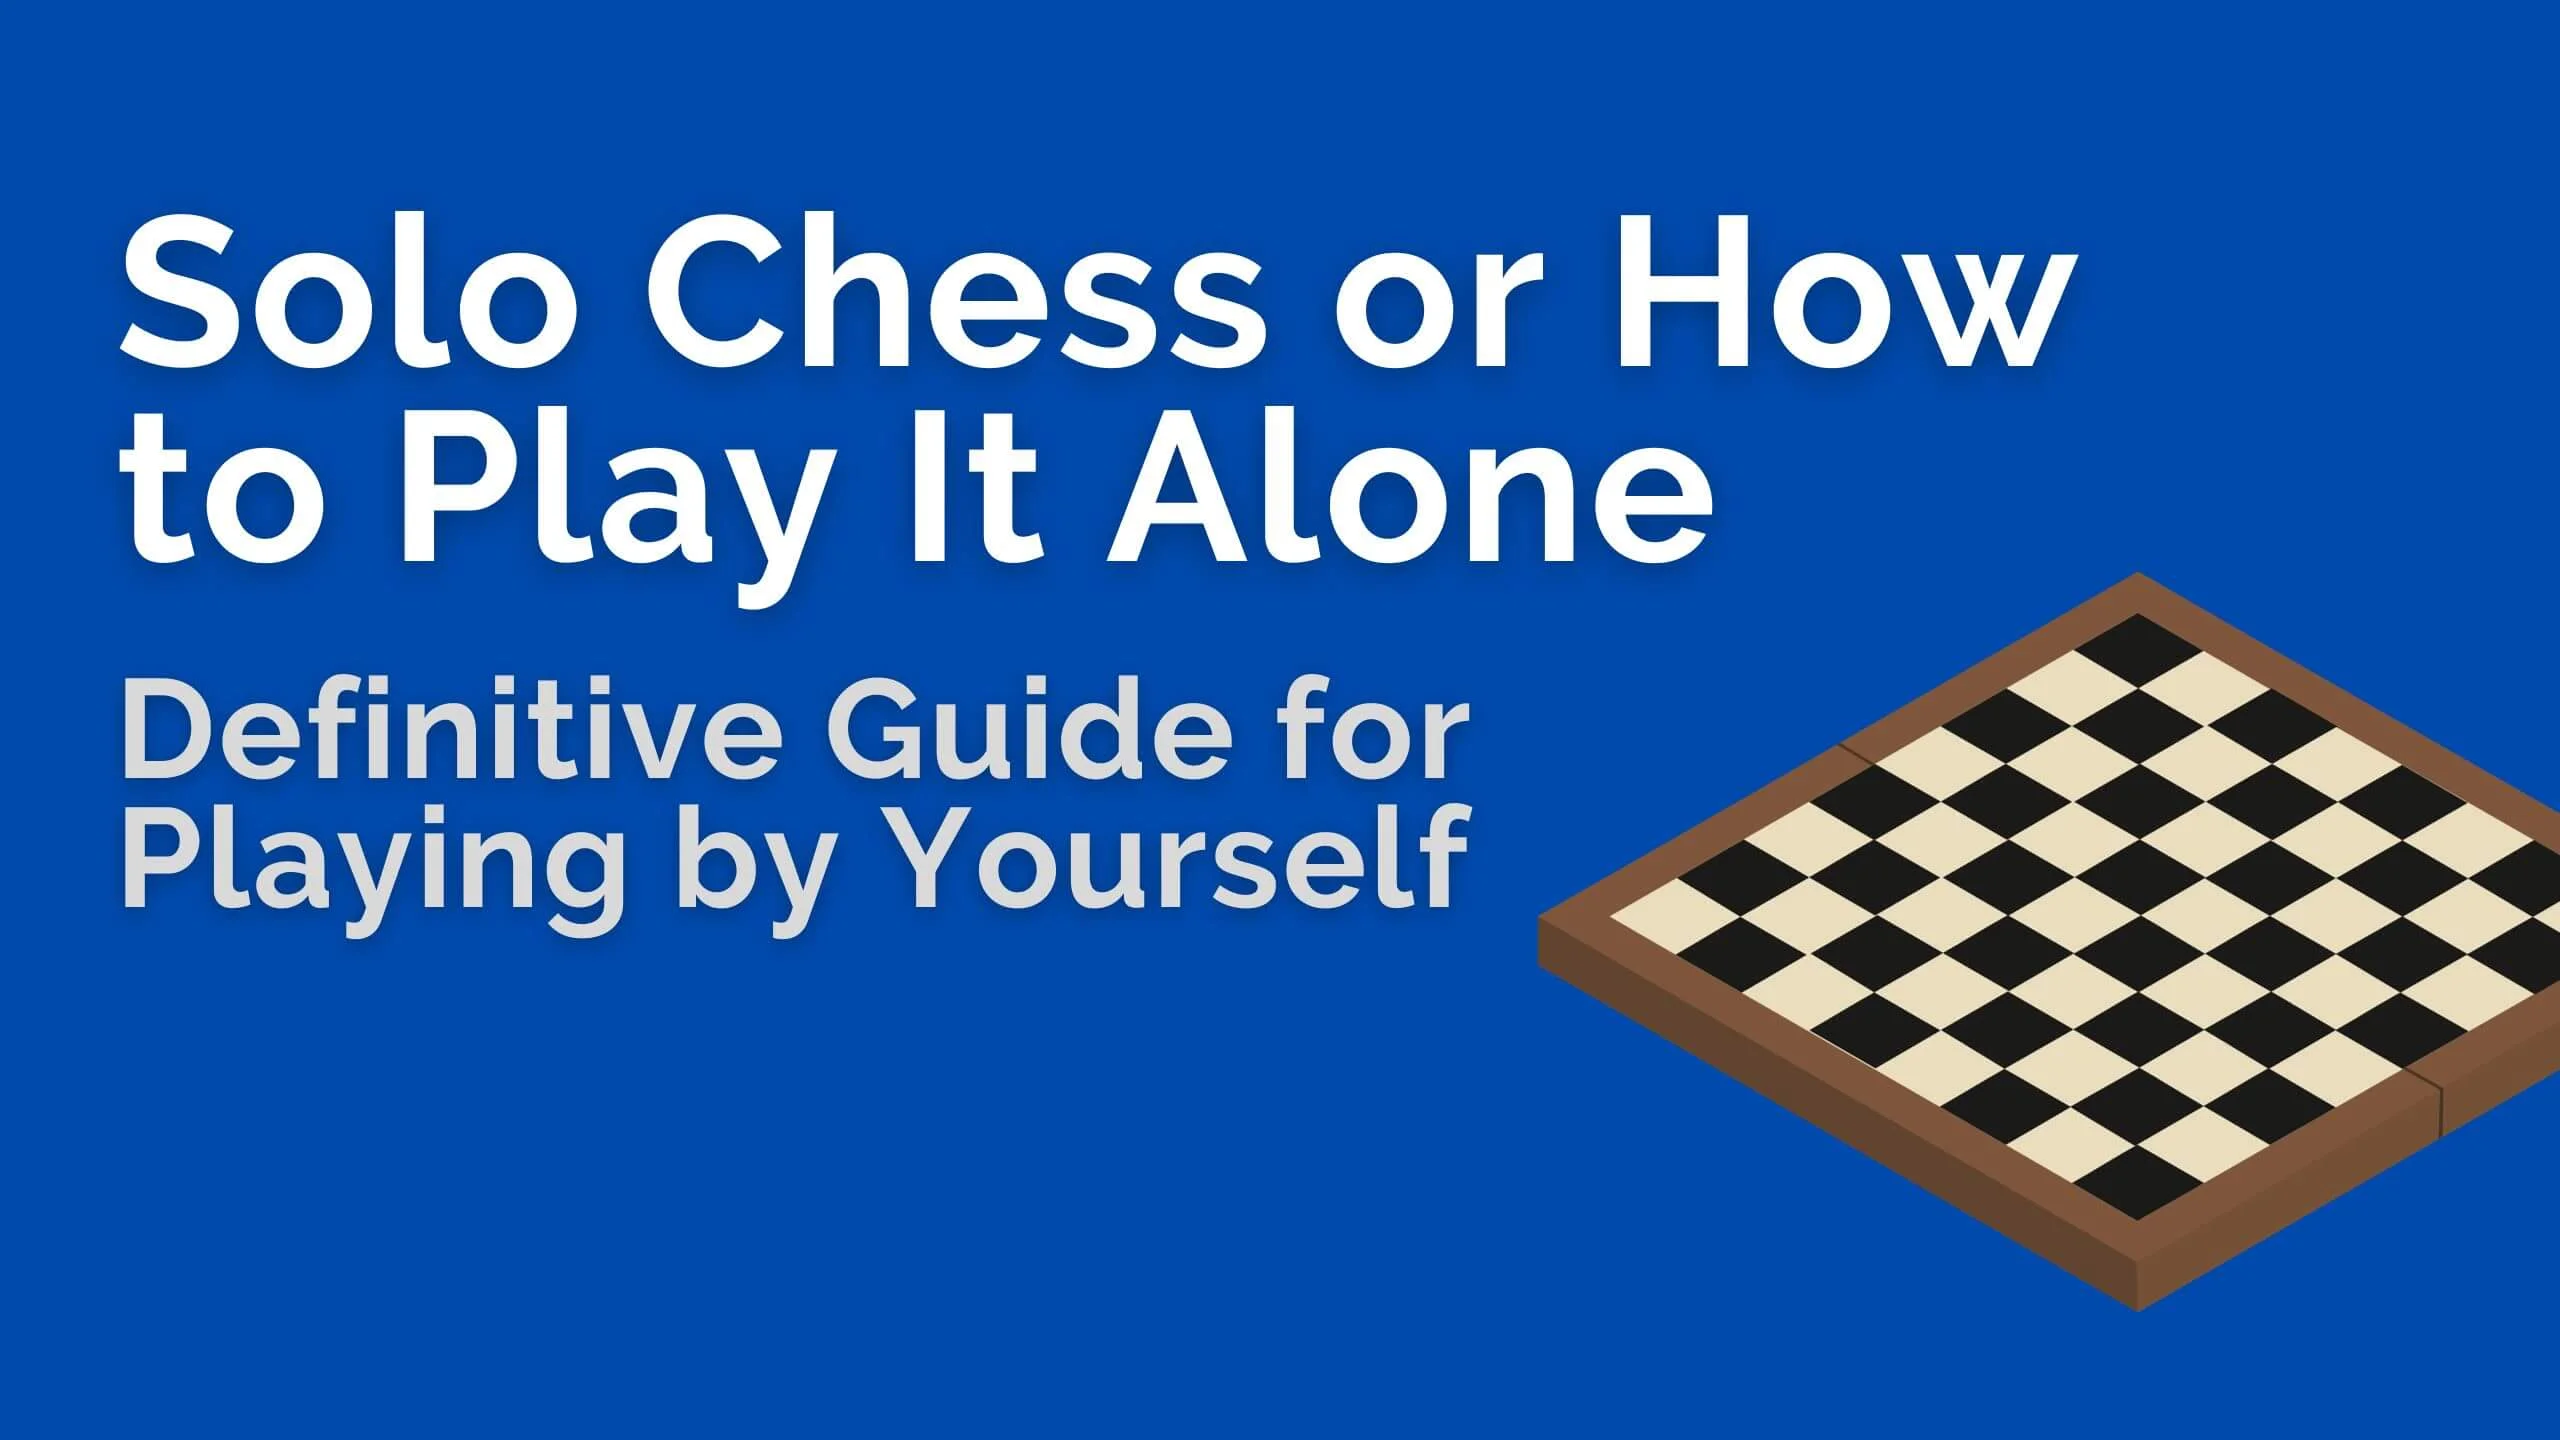 Solo Chess or How to Play It Alone: Definitive Guide for Playing by Yourself